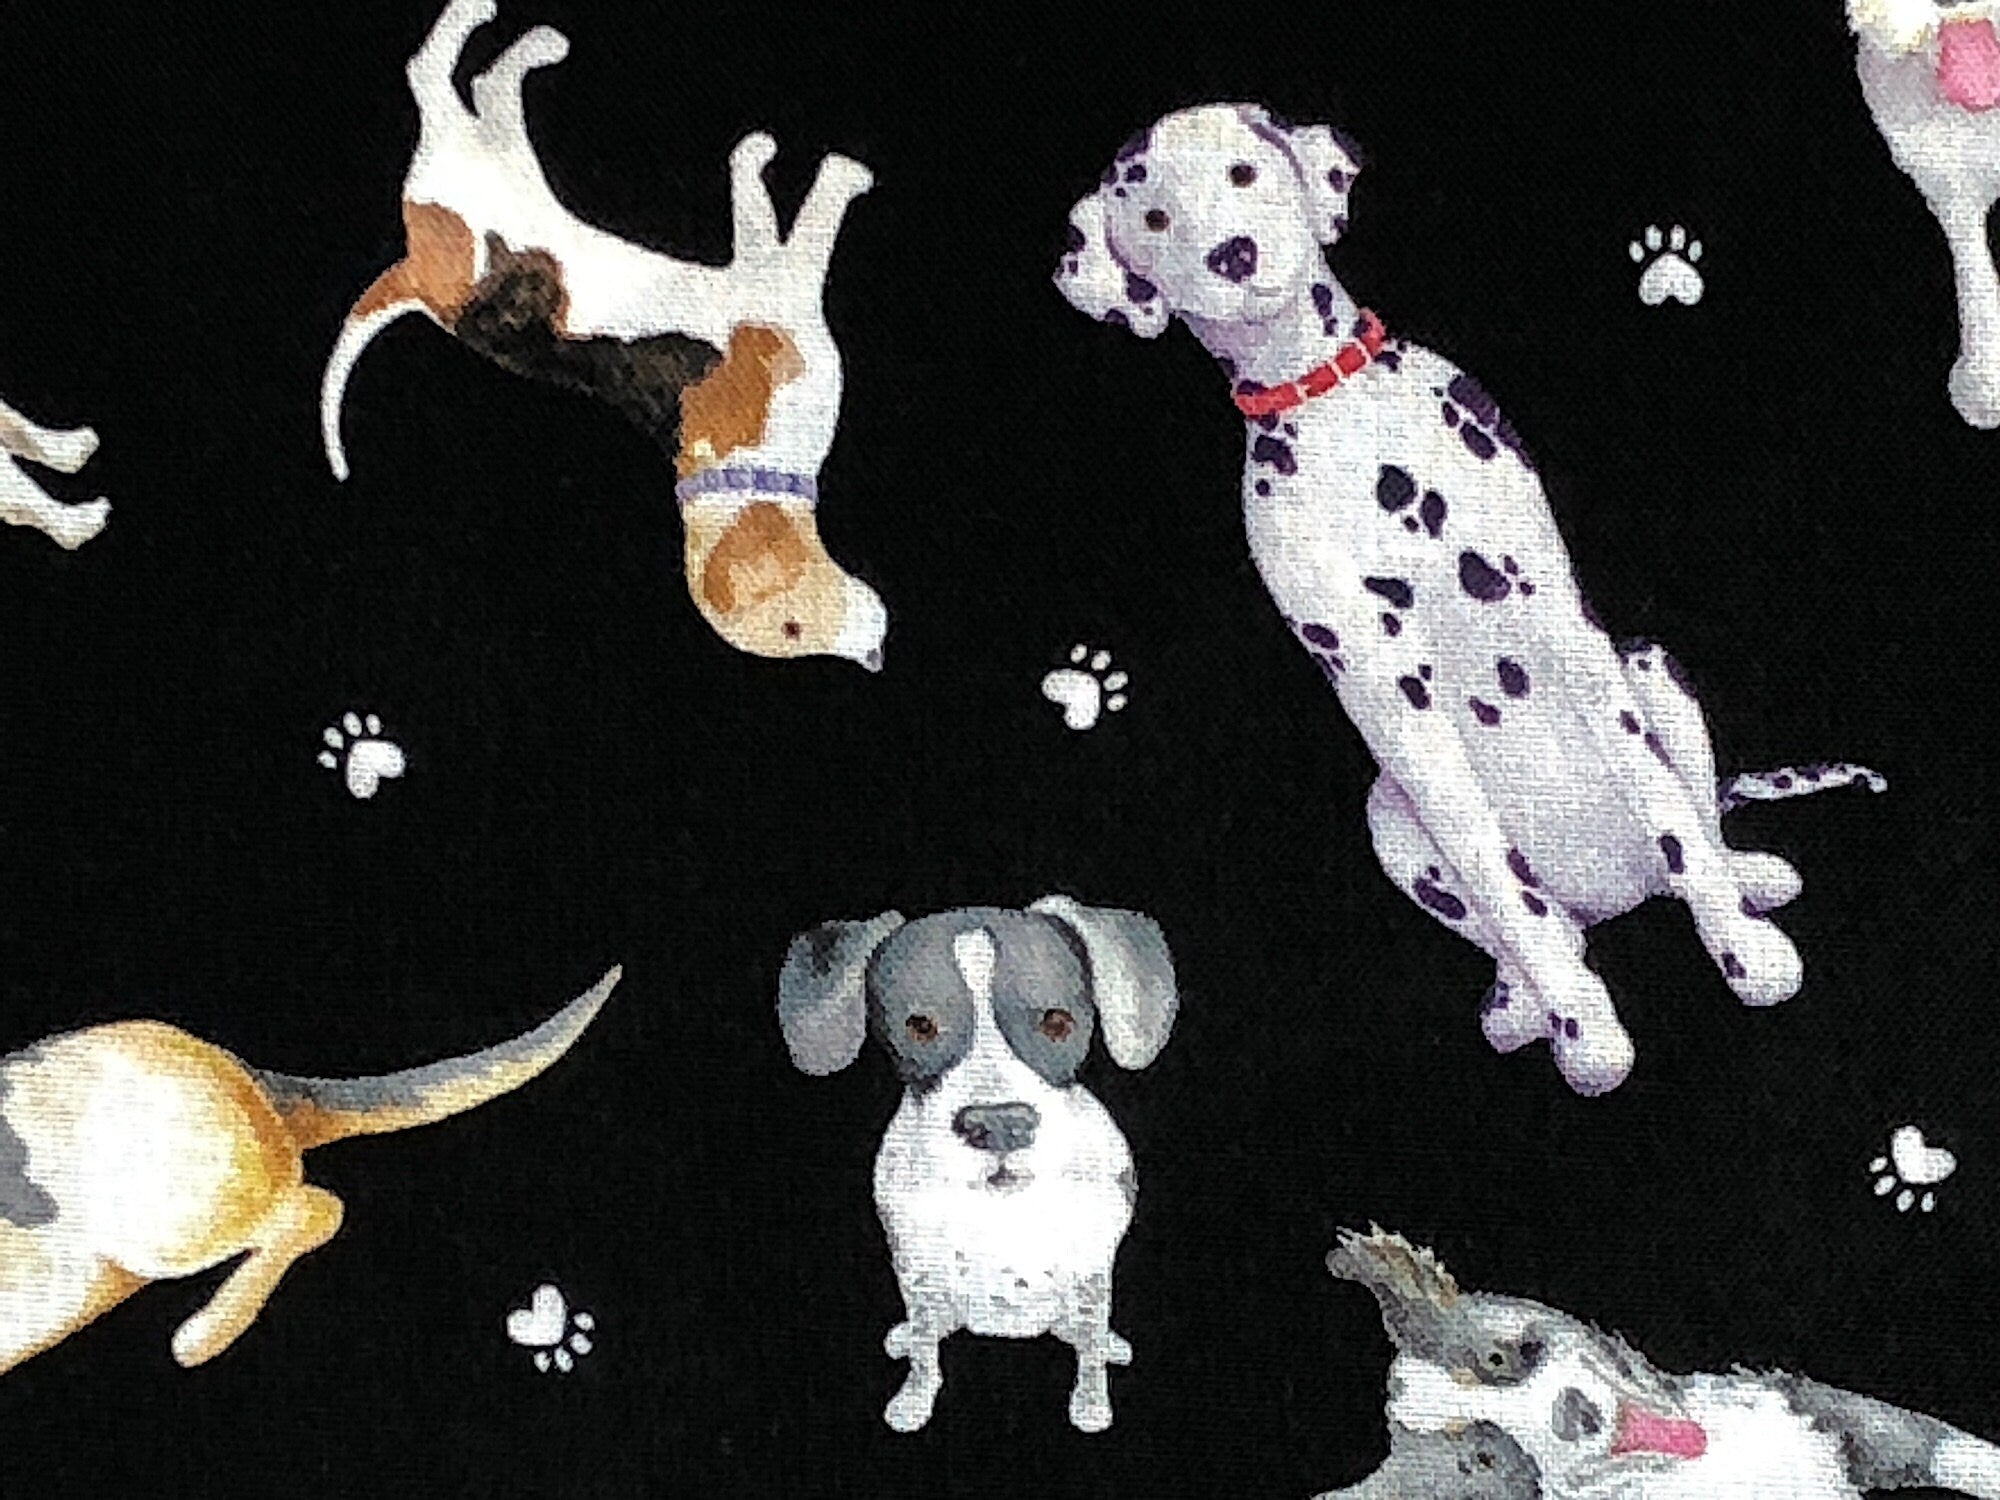 This black fabric is covered with dog breeds and small paw prints This fabric is part of the Think Pawsitive collection designed by Andi Metz.